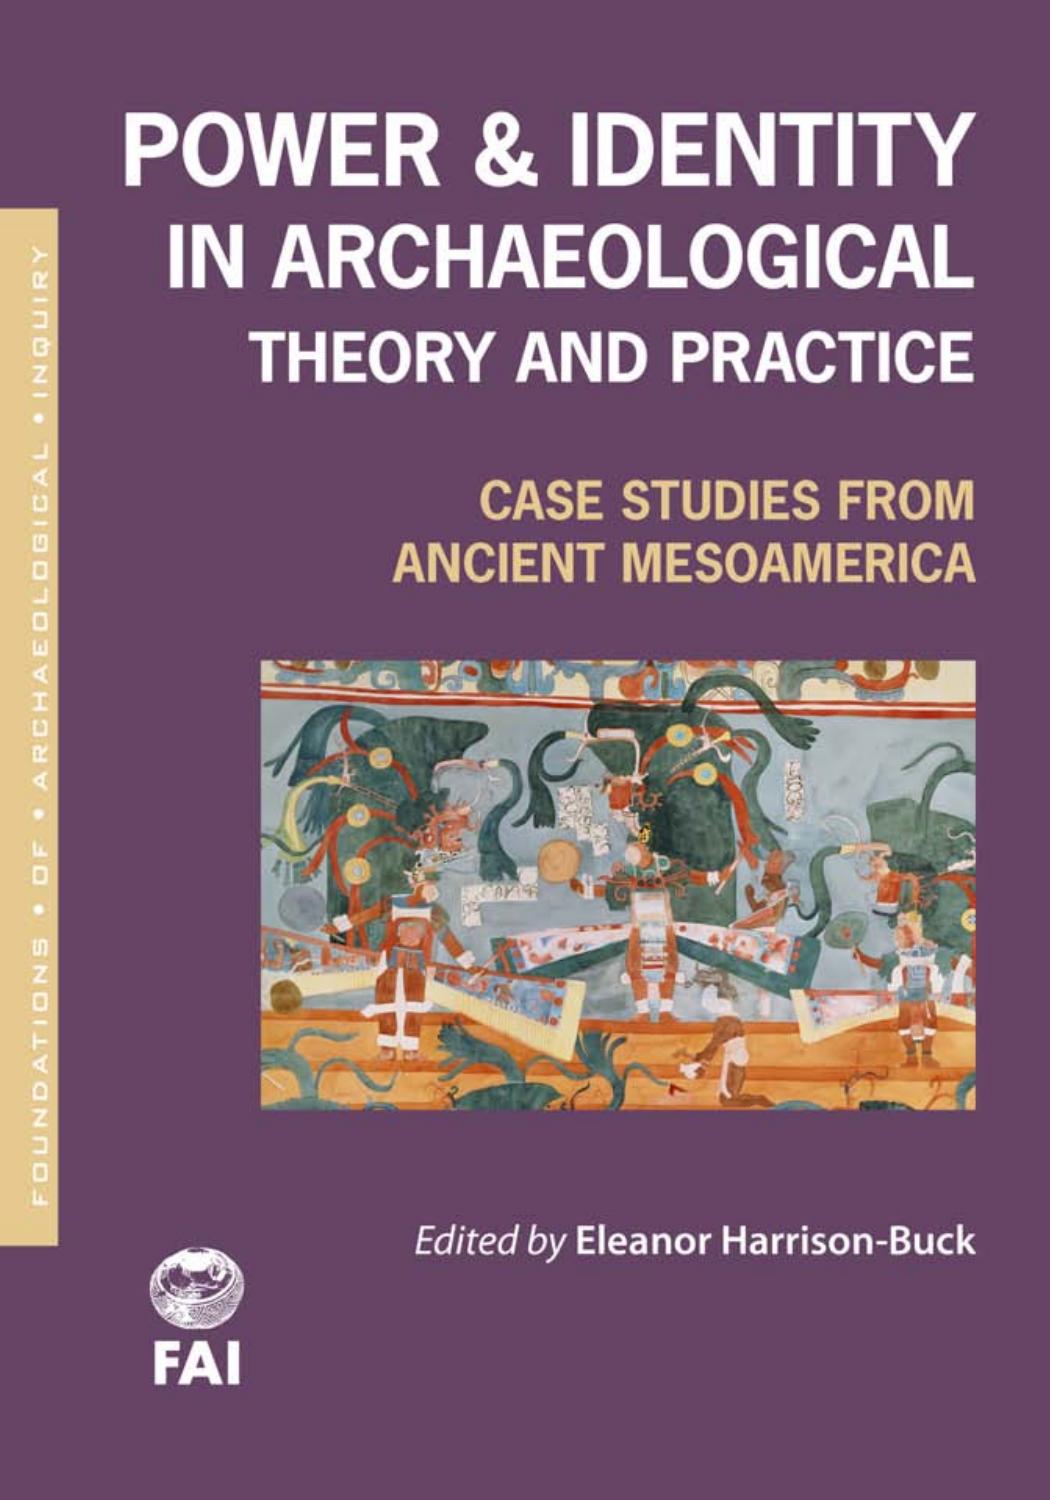 Power and Identity in Archaeological Theory and Practice : Case Studies from Ancient Mesoamerica by Eleanor Harrison-Buck